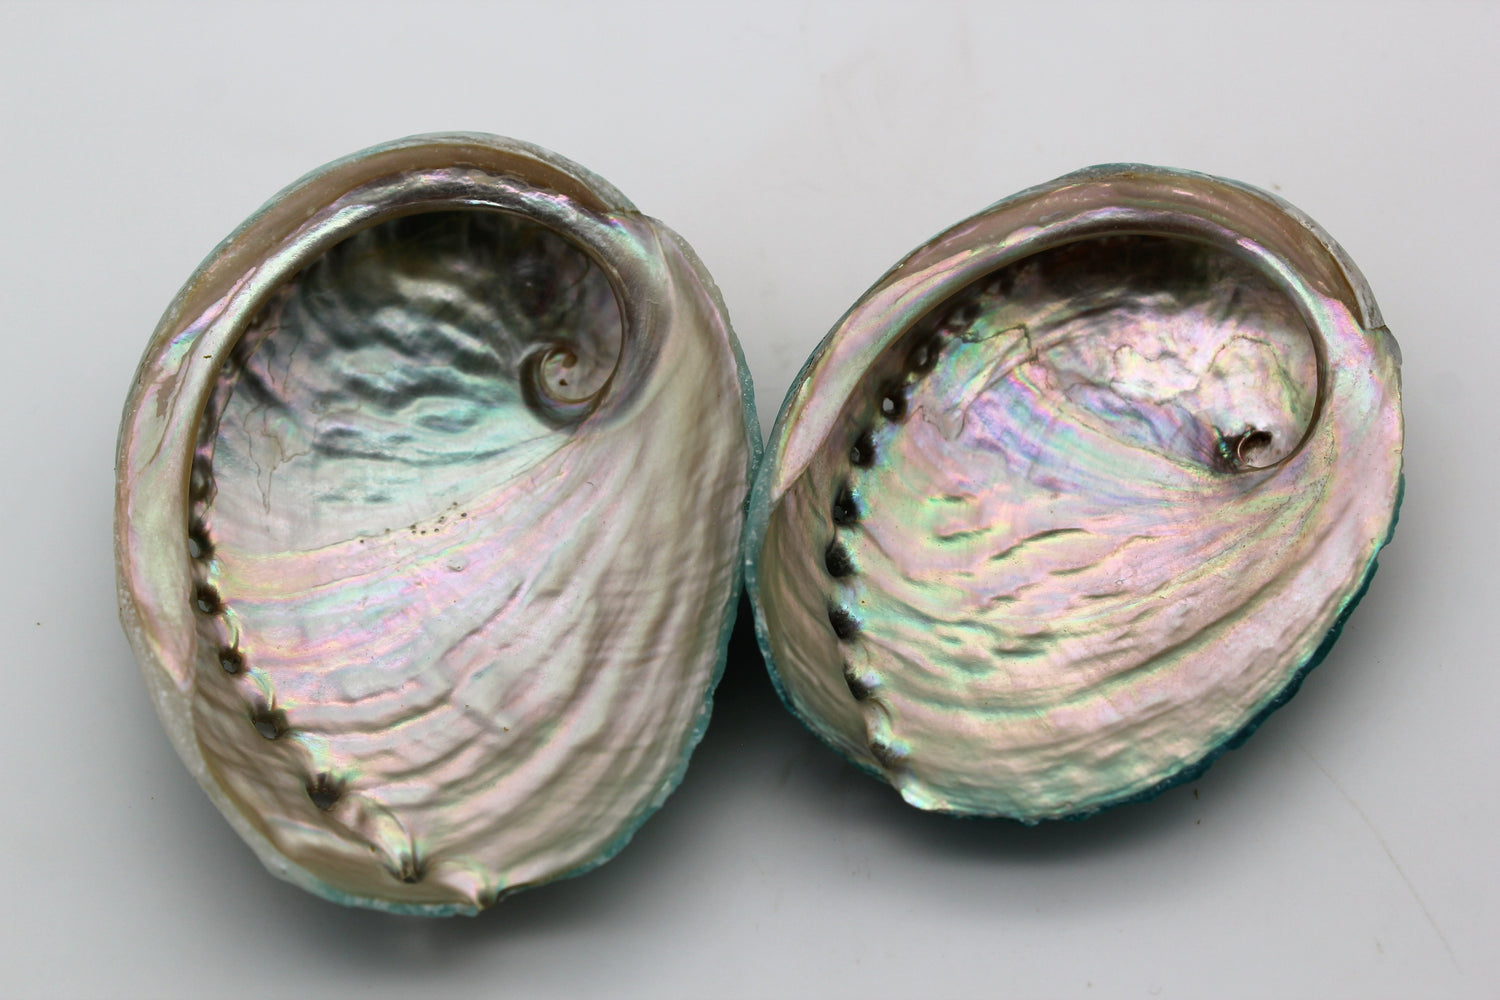 Crossbred Greenlip and Blacklip Abalone Shells Front